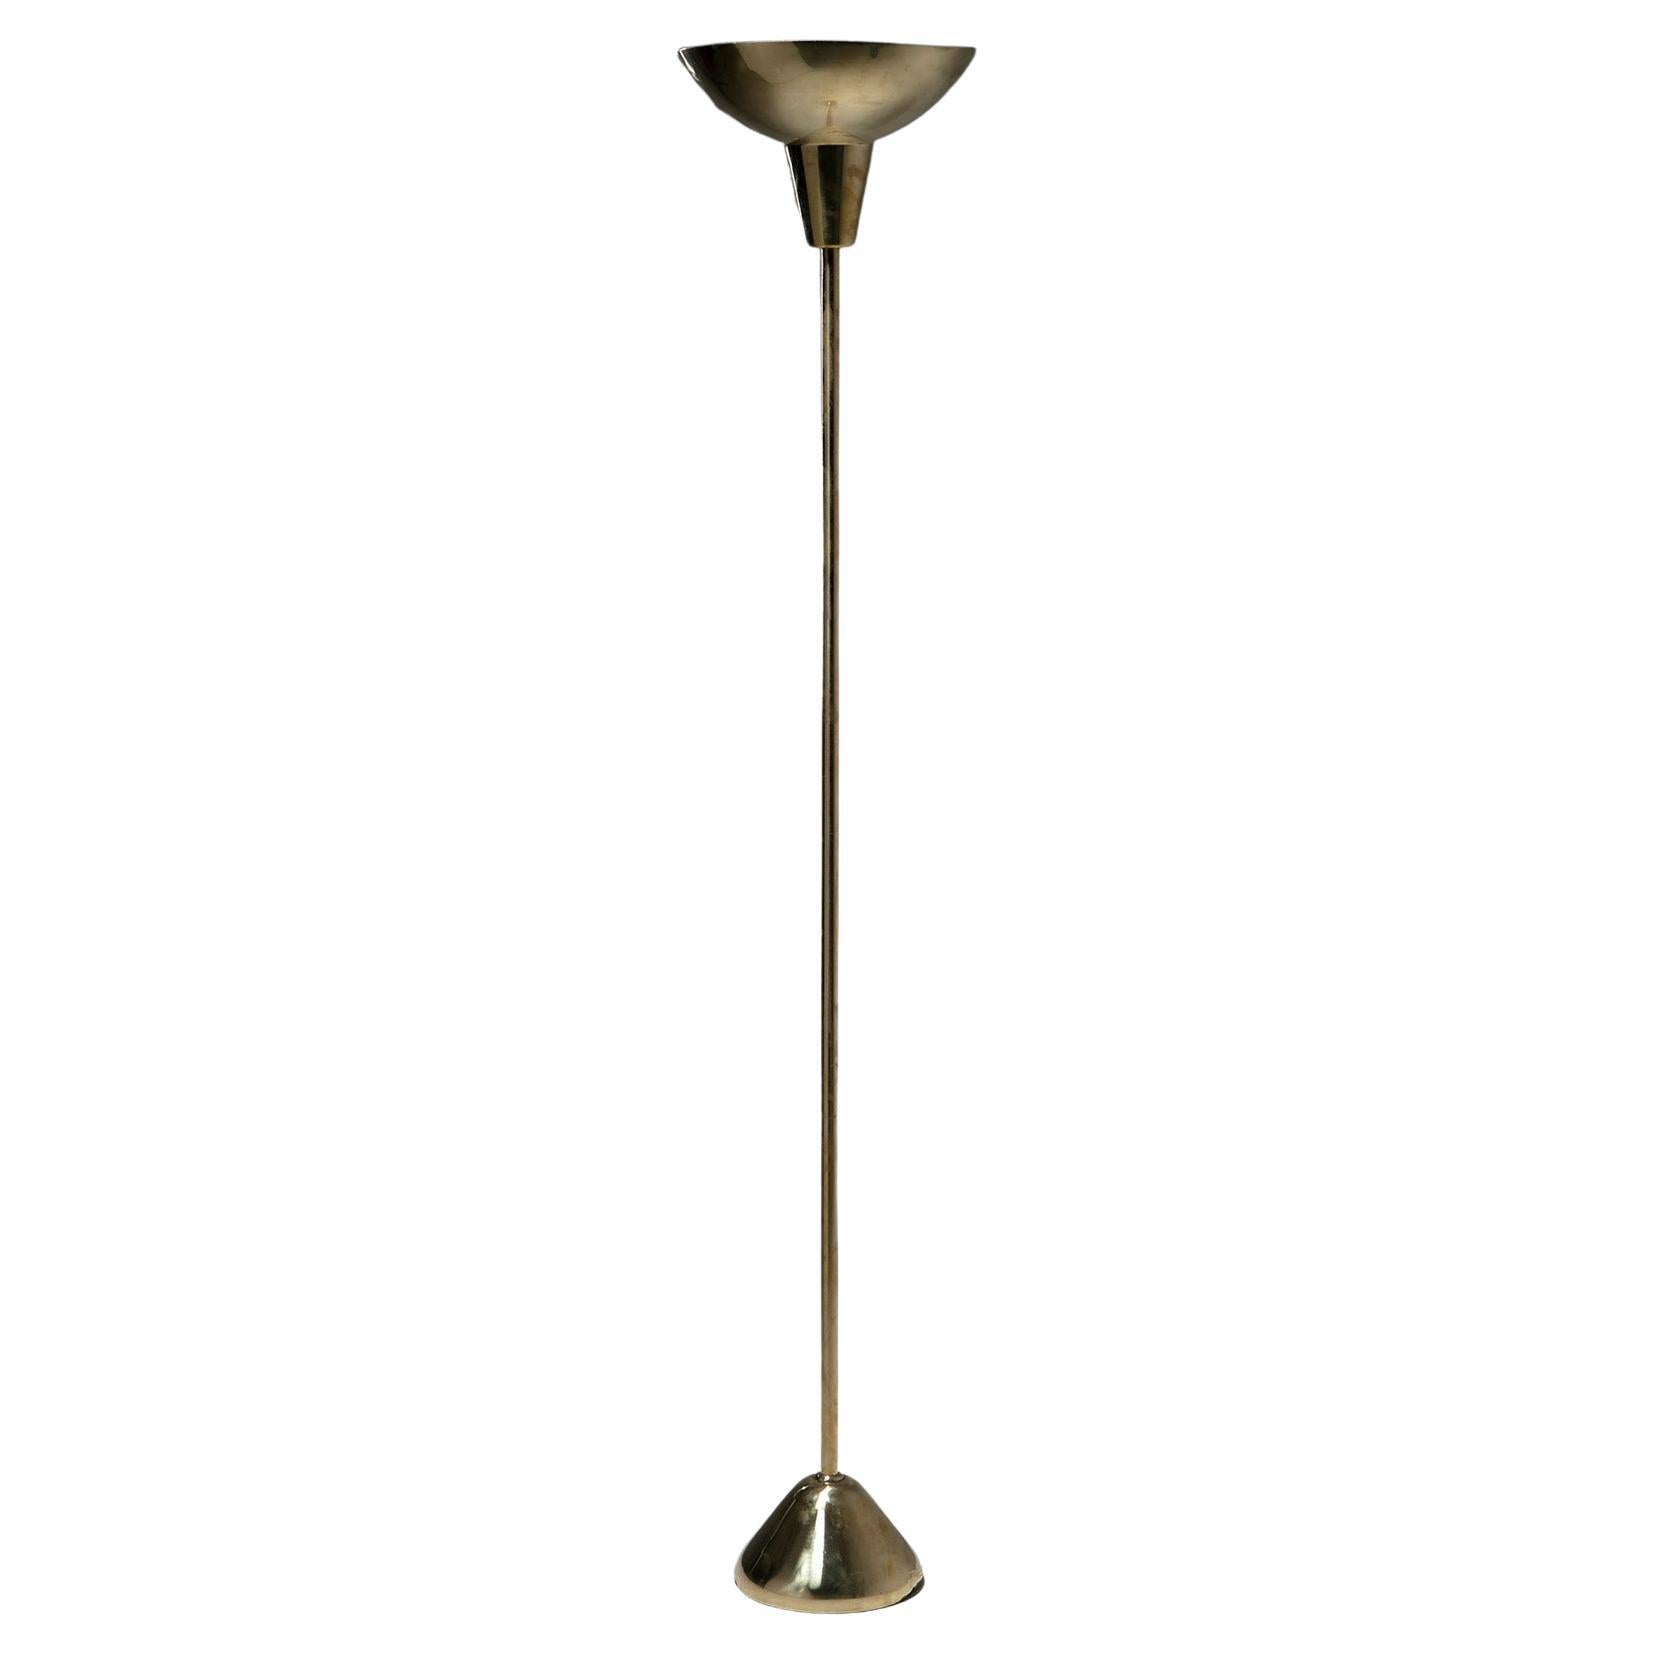 "LTe1" Brass Minimal Floor Lamp by Caccia Dominioni for Azucena, Italy, 1950s For Sale